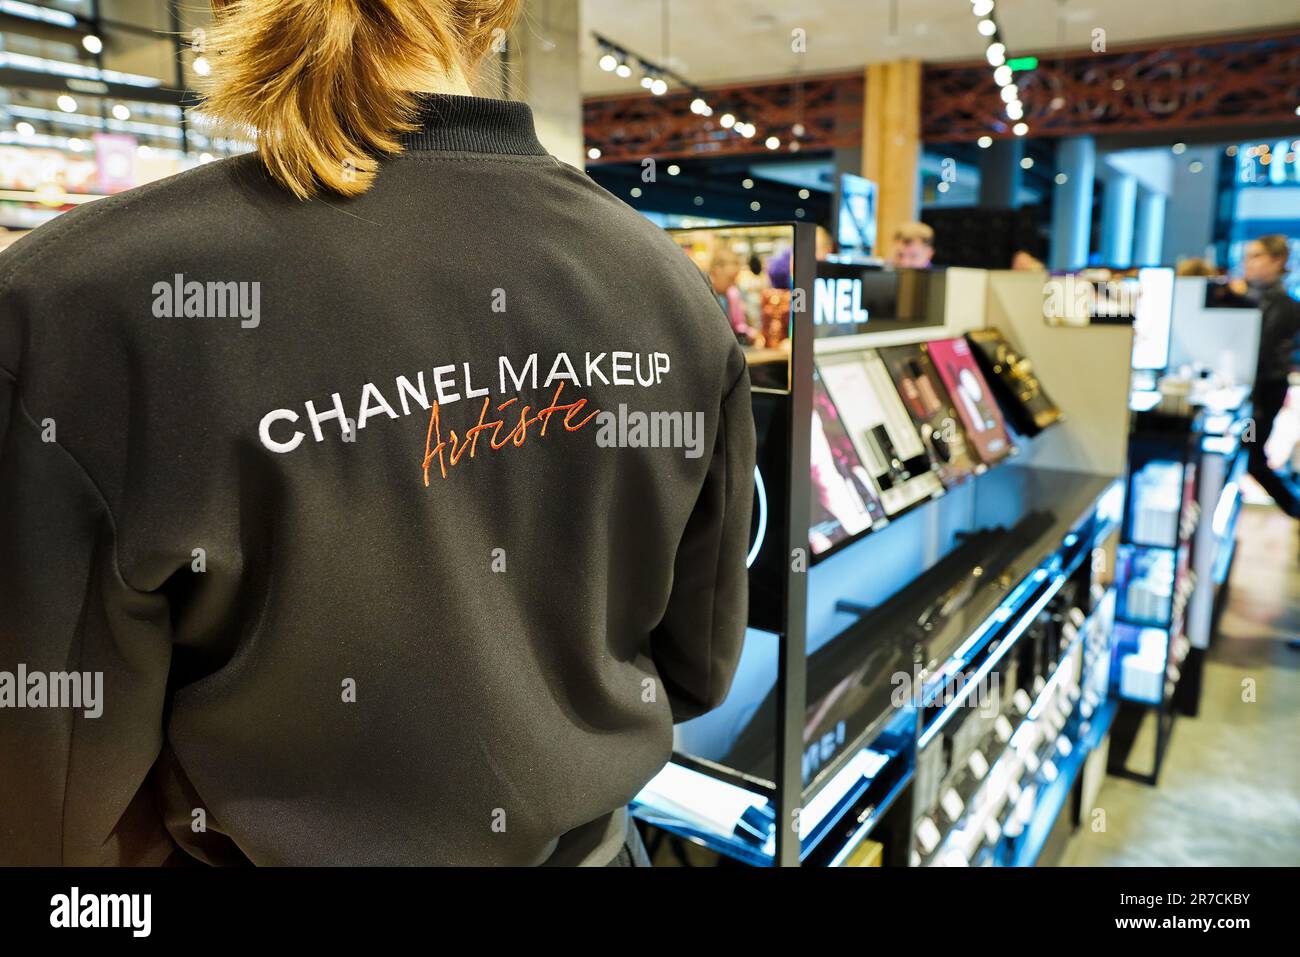 Chanel Just Launched a First-of-its-kind Beauty Atelier in NYC